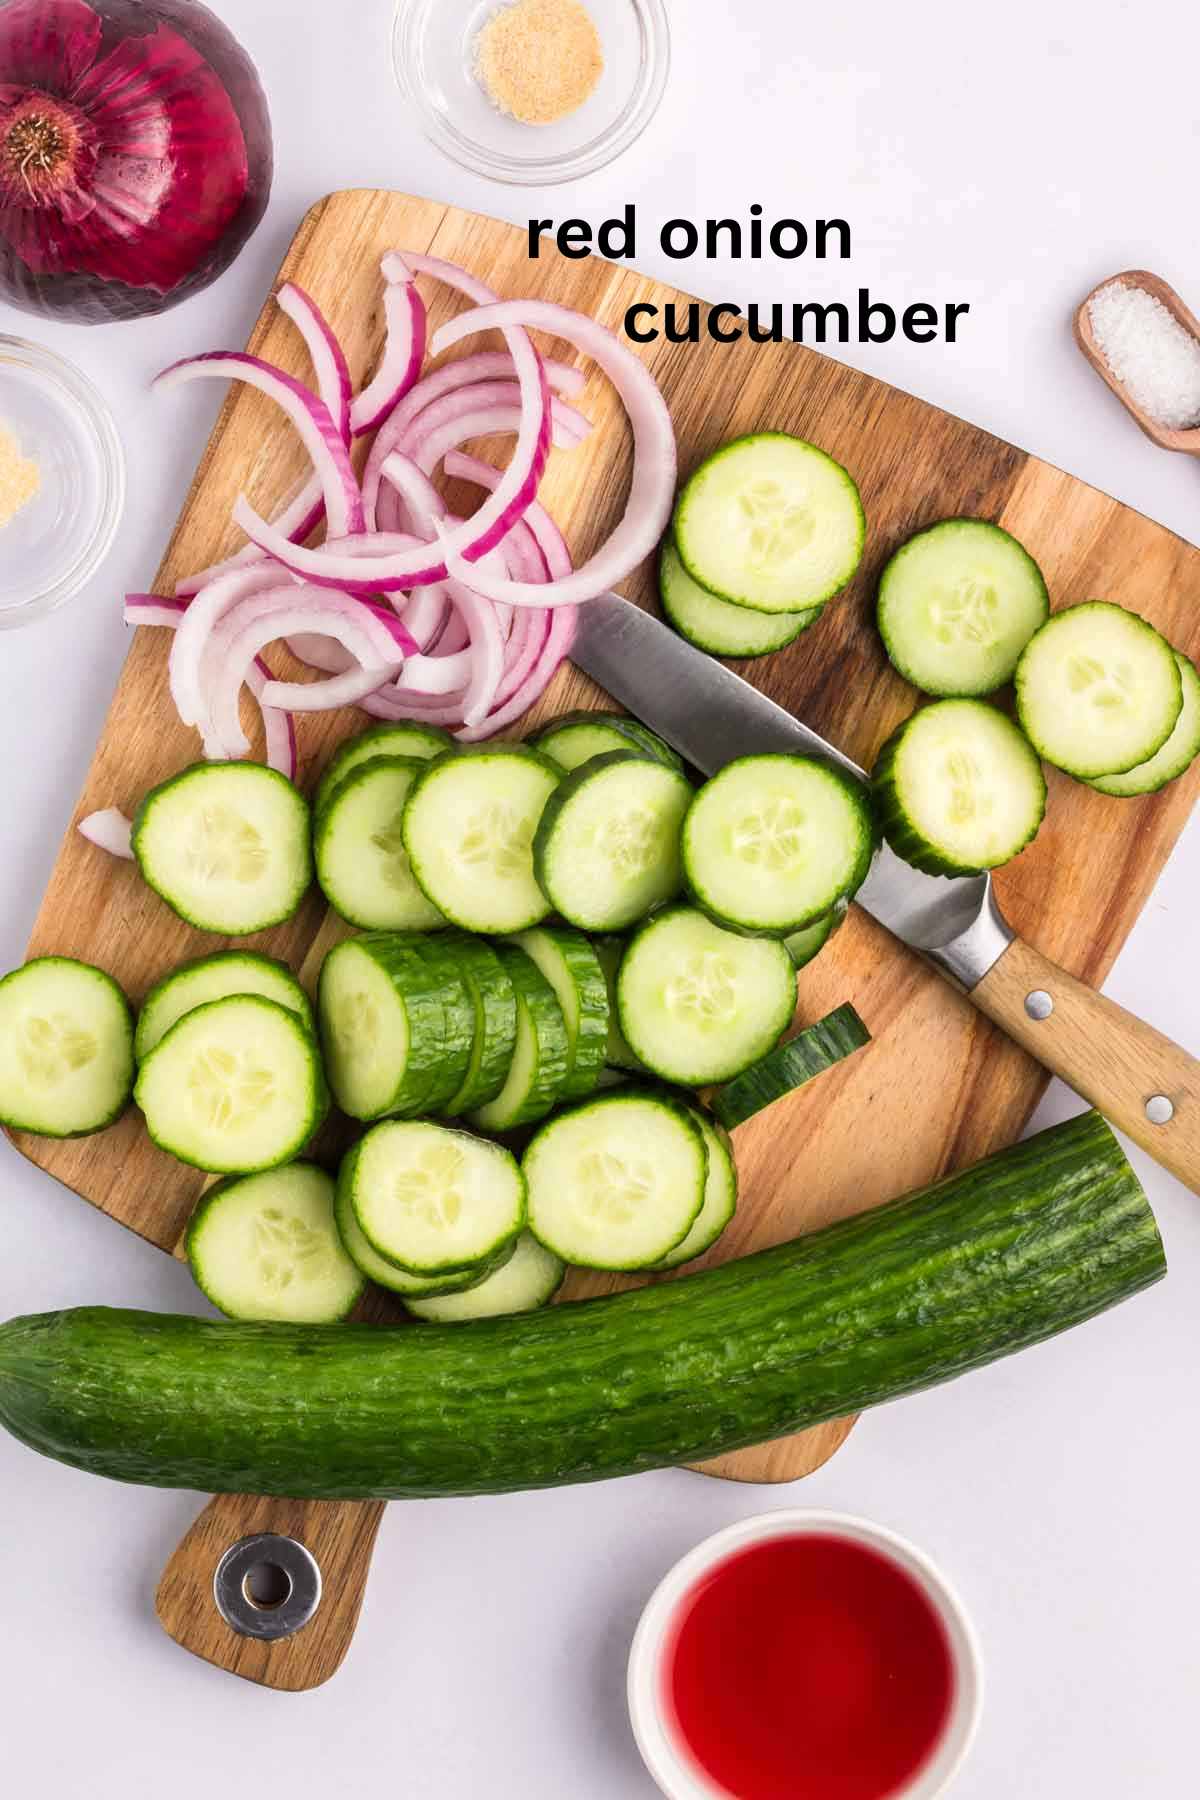 Cucumbers and red onions being chopped on a wooden cutting board.